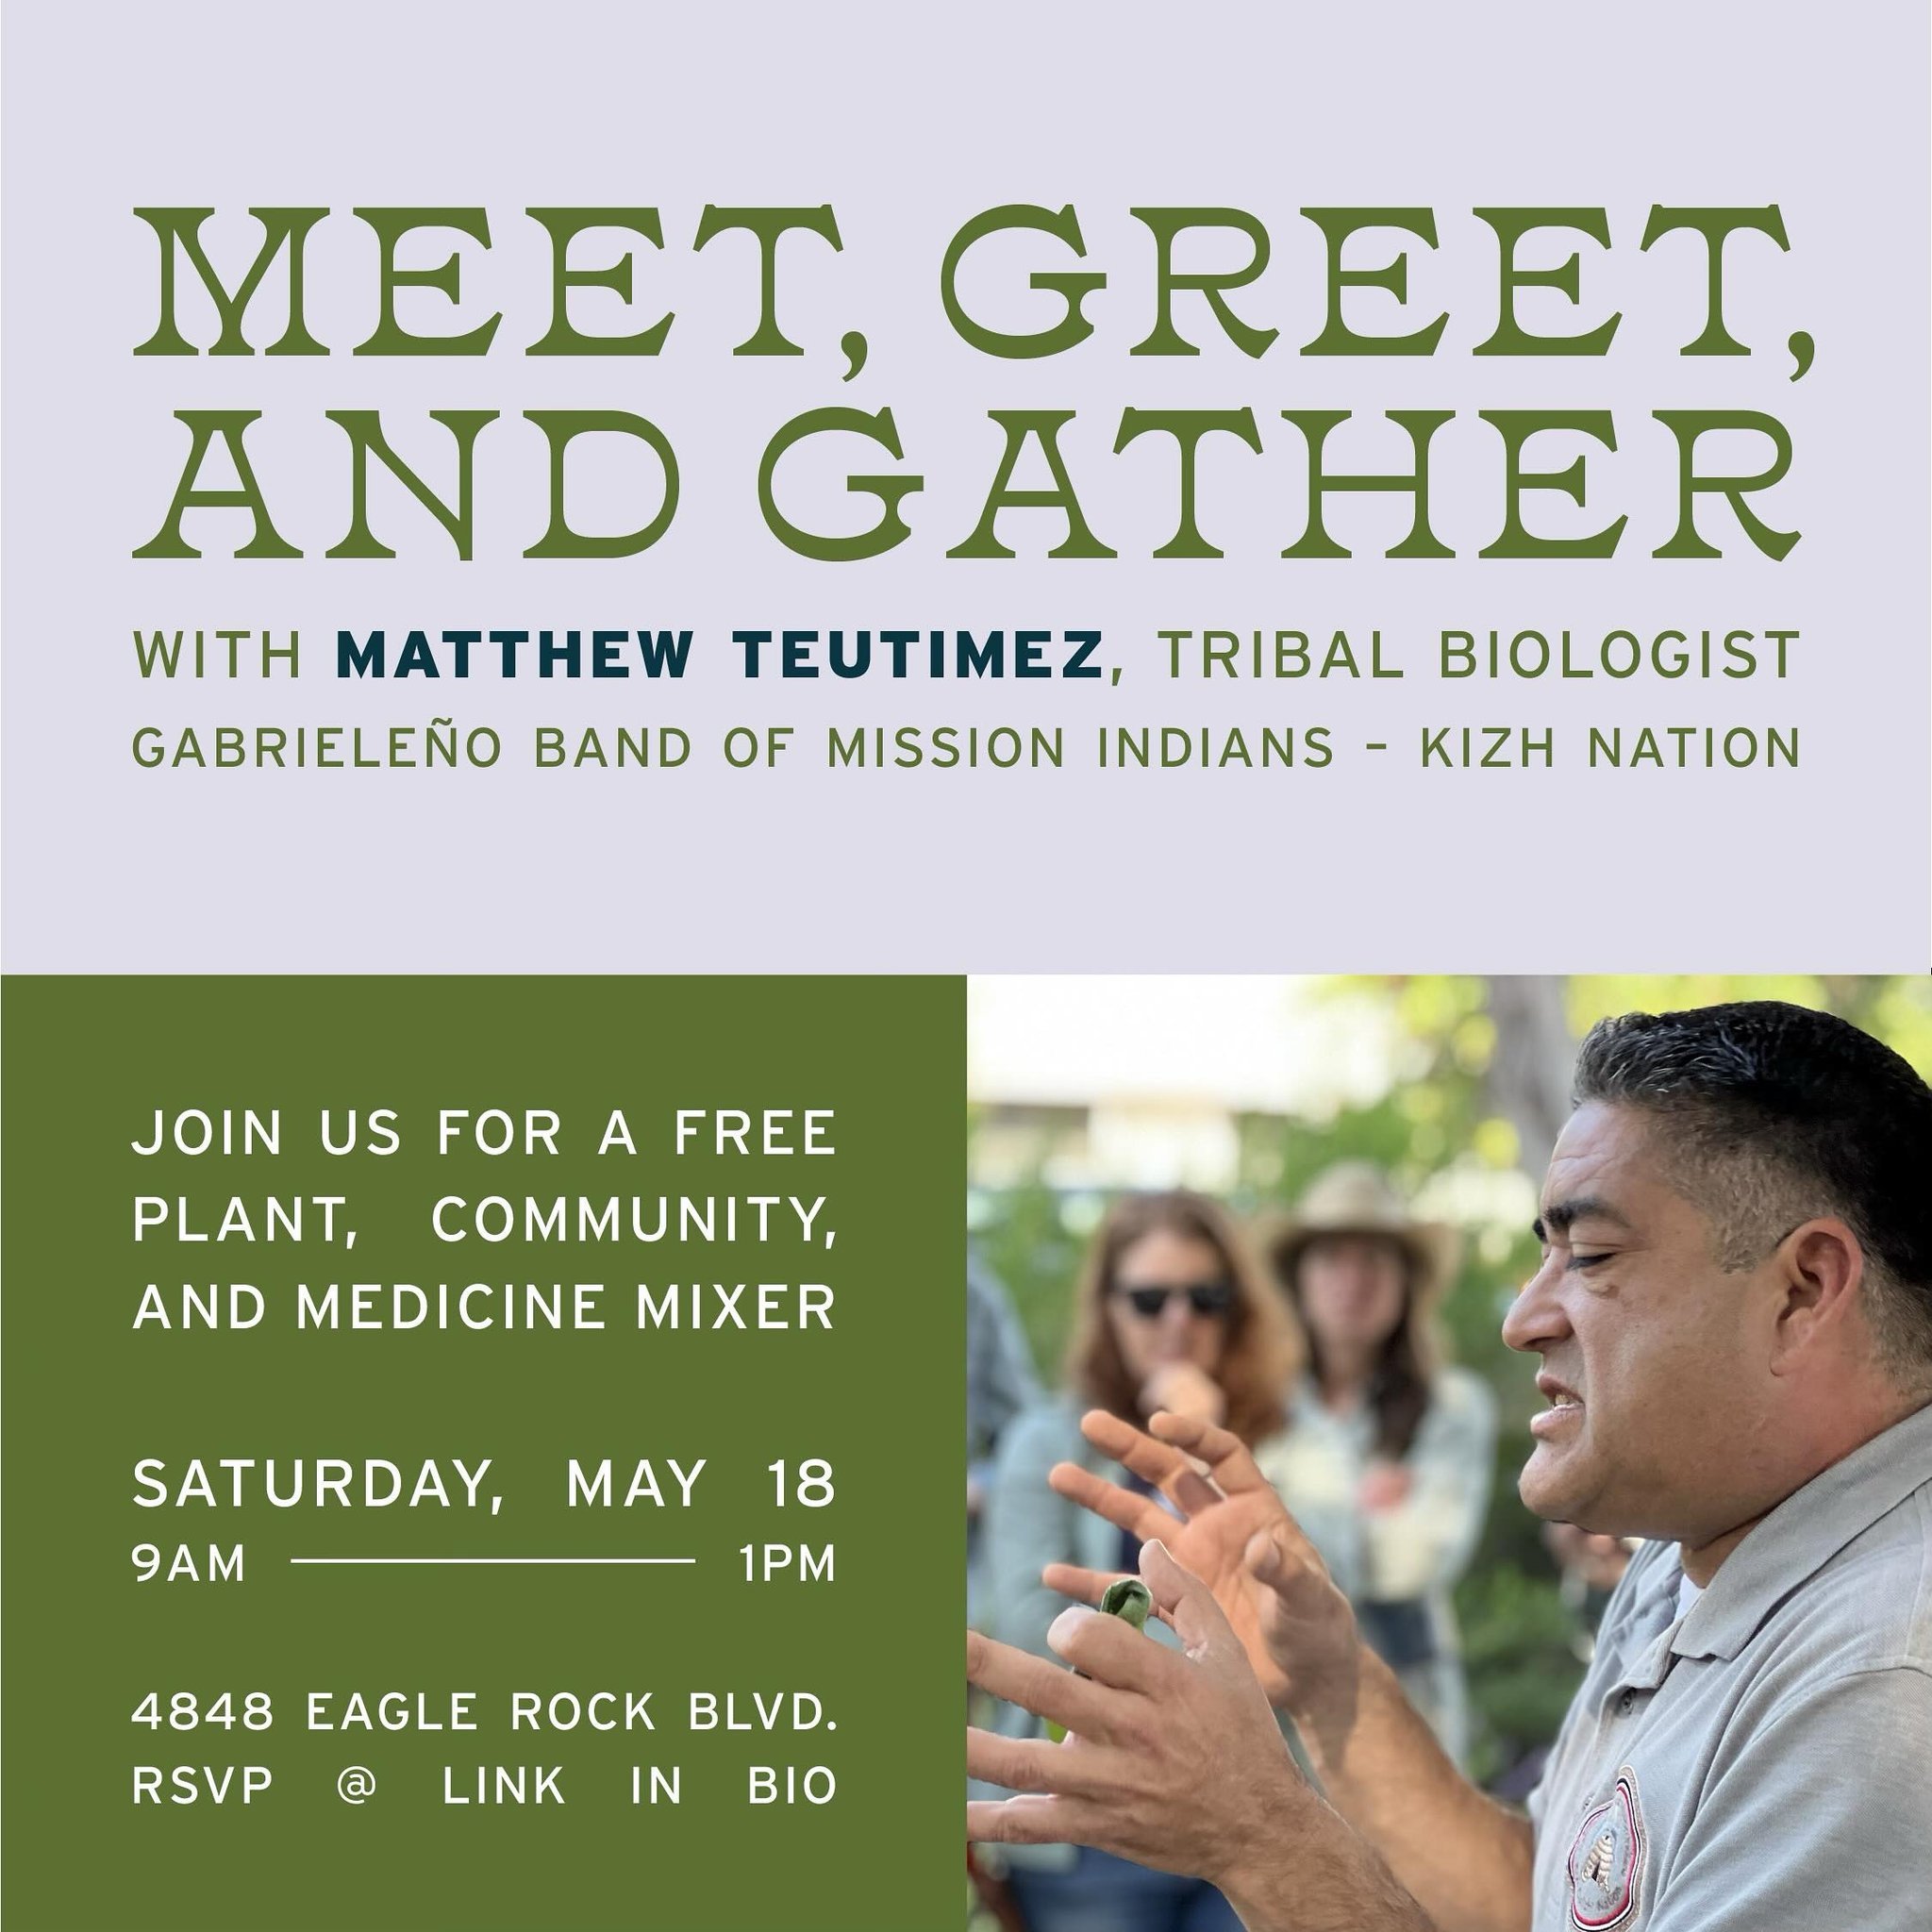 Plant Medicine + Volunteer Day + Meet Your Neighbors = Community Win!
.

Friends and Neighbors-
Please join us at the ERPC Native Garden here in Eagle Rock for an introduction to  our community garden, including a native plant-medicine demonstration 